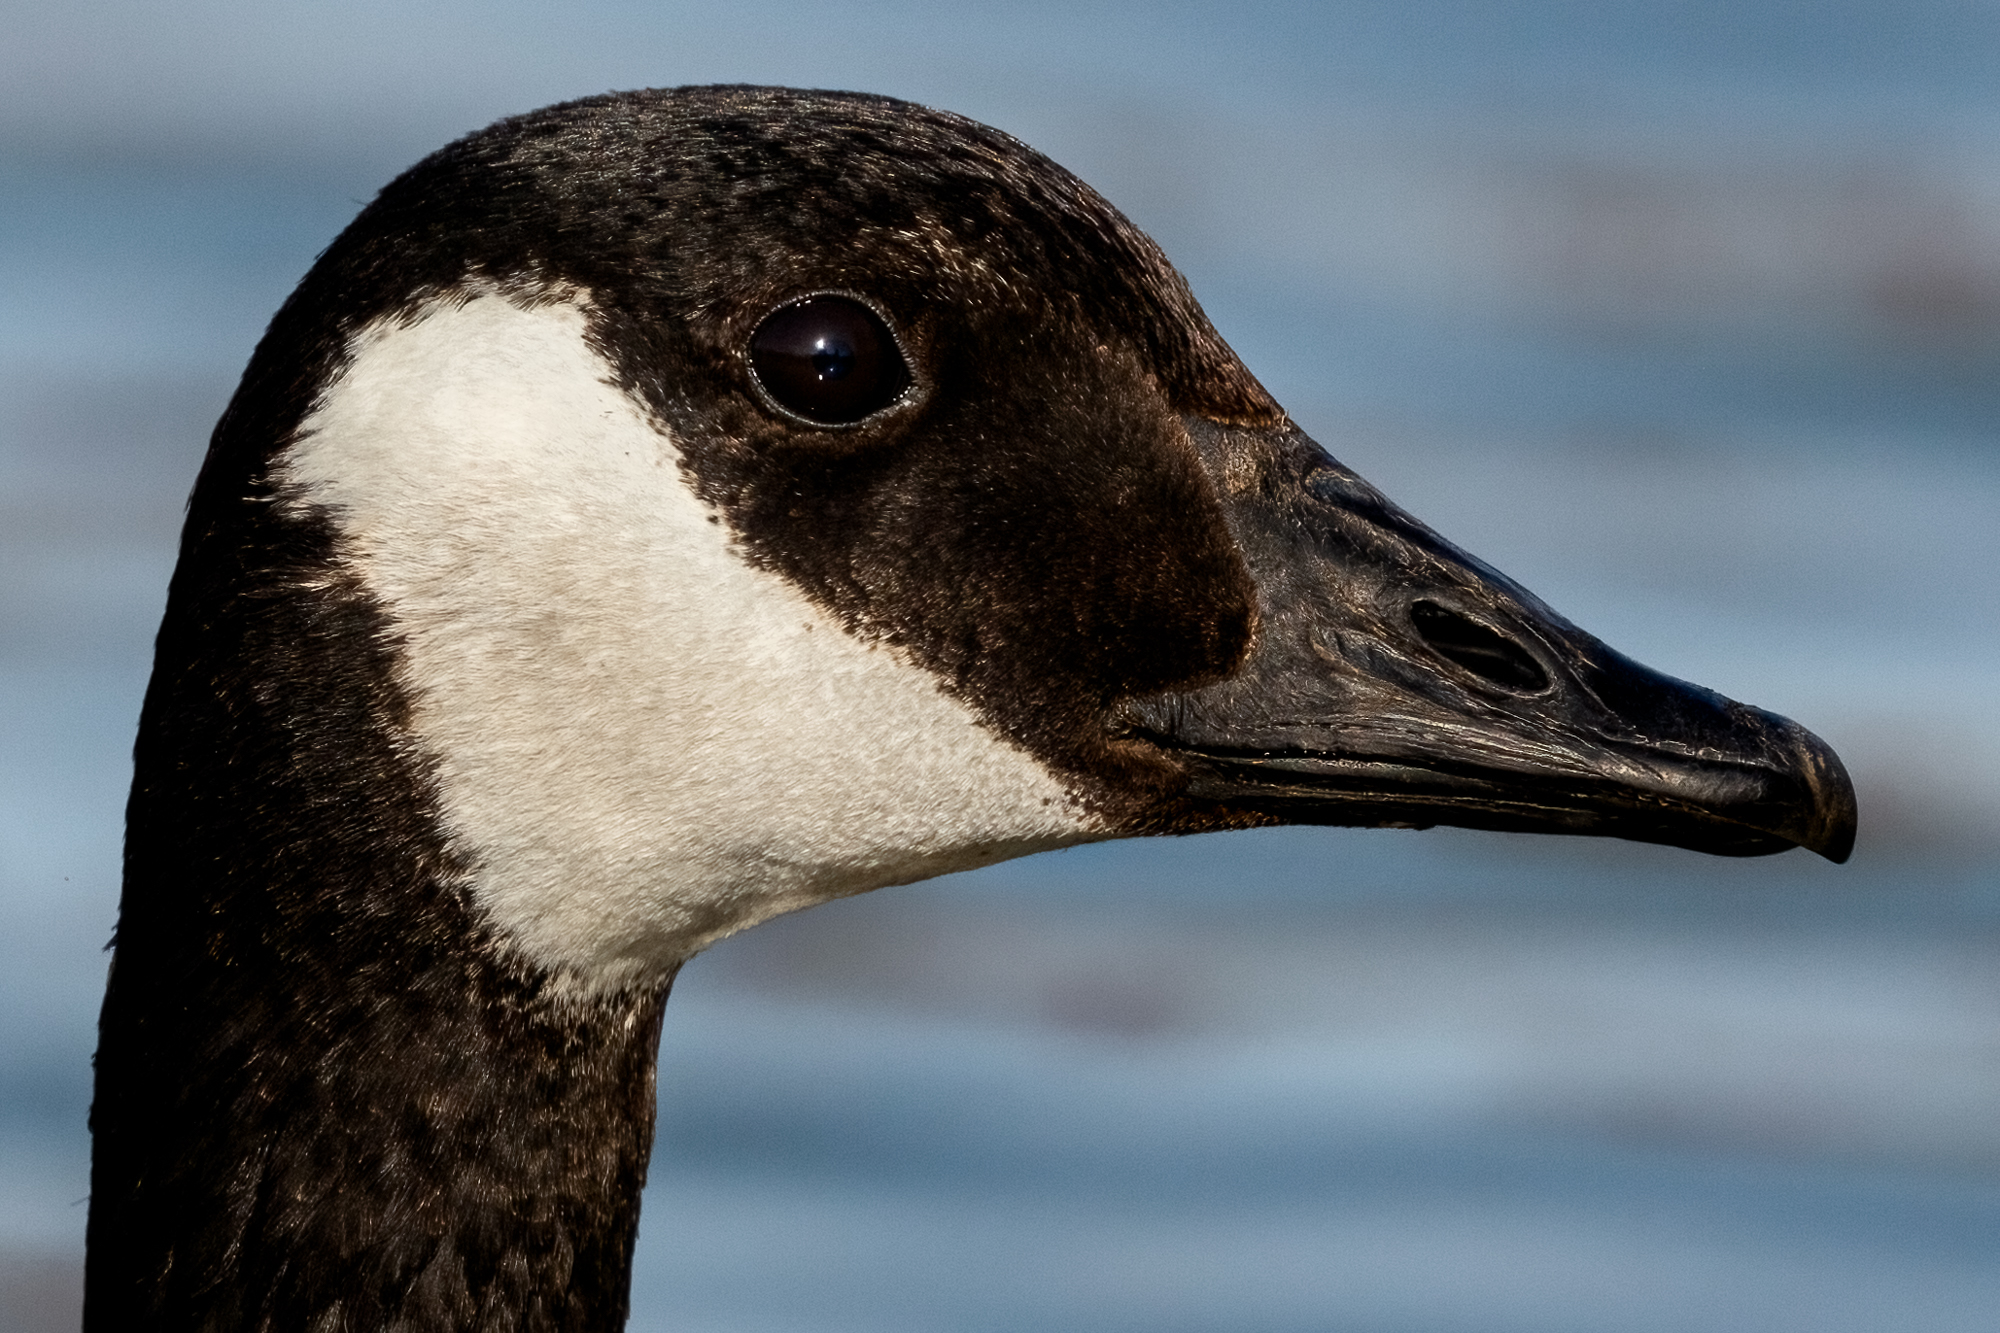 Close up photo of the head of a Canada Goose